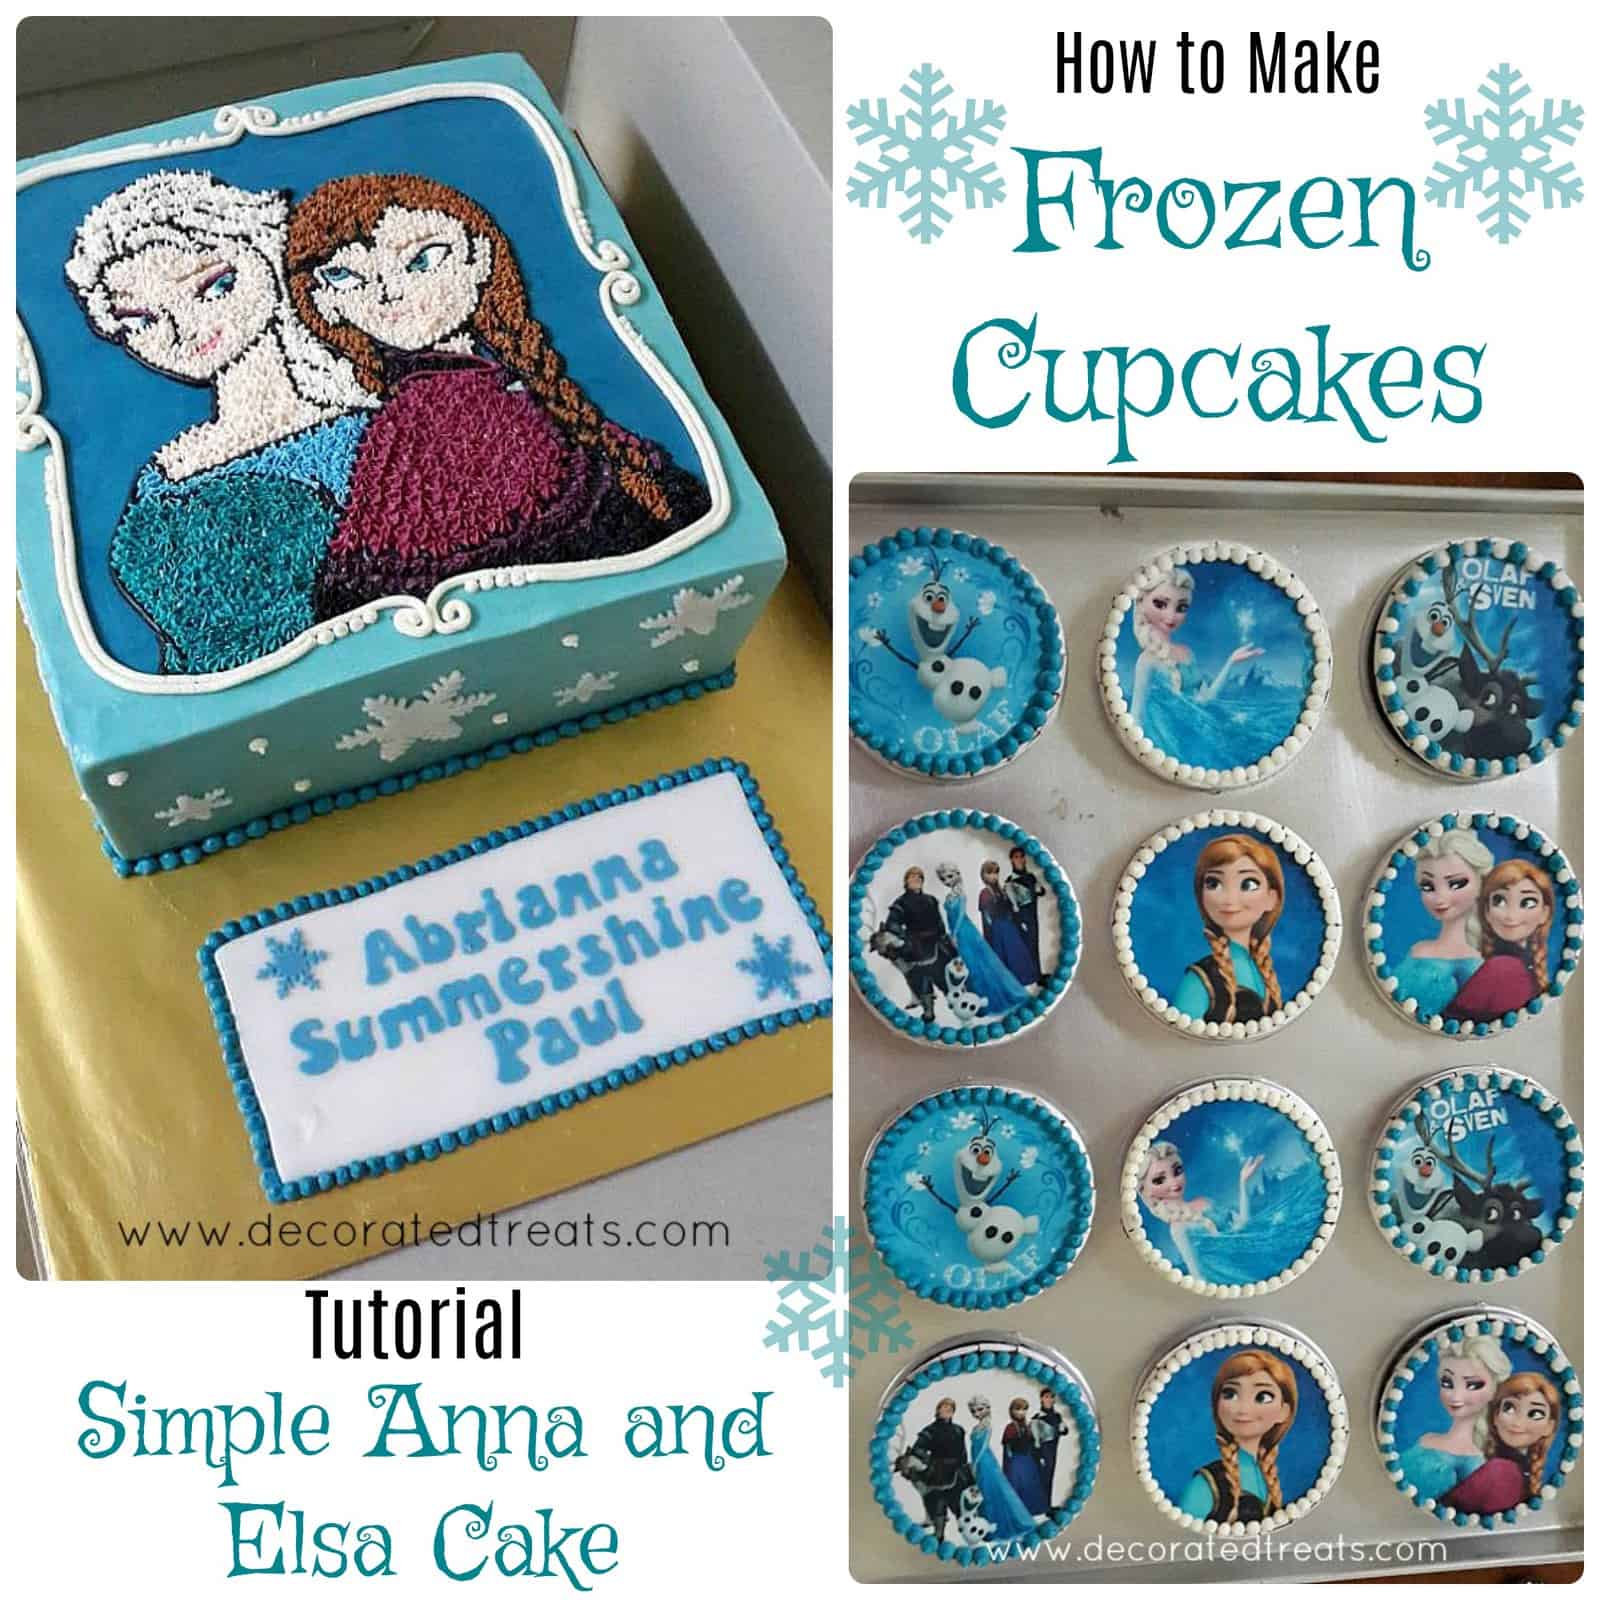 A poster of a square cake with Anna and Elsa images in buttercream and a set of cupcakes decorated with characters from the movie Frozen